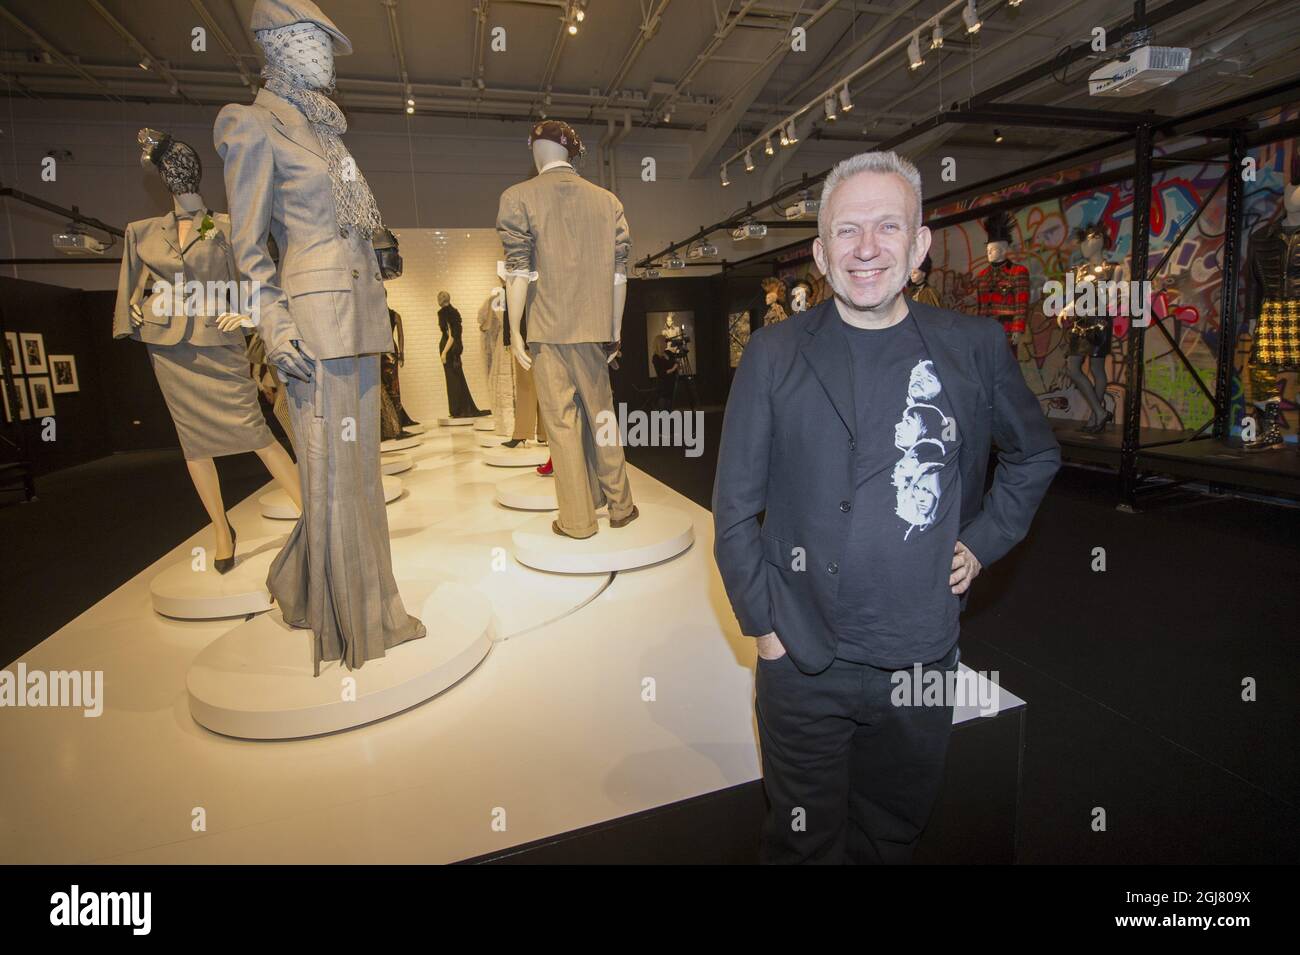 STOCKHOLM 20130613 The French designer Jean-Paul Gaultier at the Architecture and Design Museum in Stockholm, Sweden to inaugurate the exhibition of his works 'The fashion world of Jean Paul Gaultier from the sidewalk to the catwalk'. Jean Paul wearing an ABBA t-shirt that he bought at the new ABBA museum. Foto: Fredrik Sandberg / SCANPIX / Kod 10080  Stock Photo